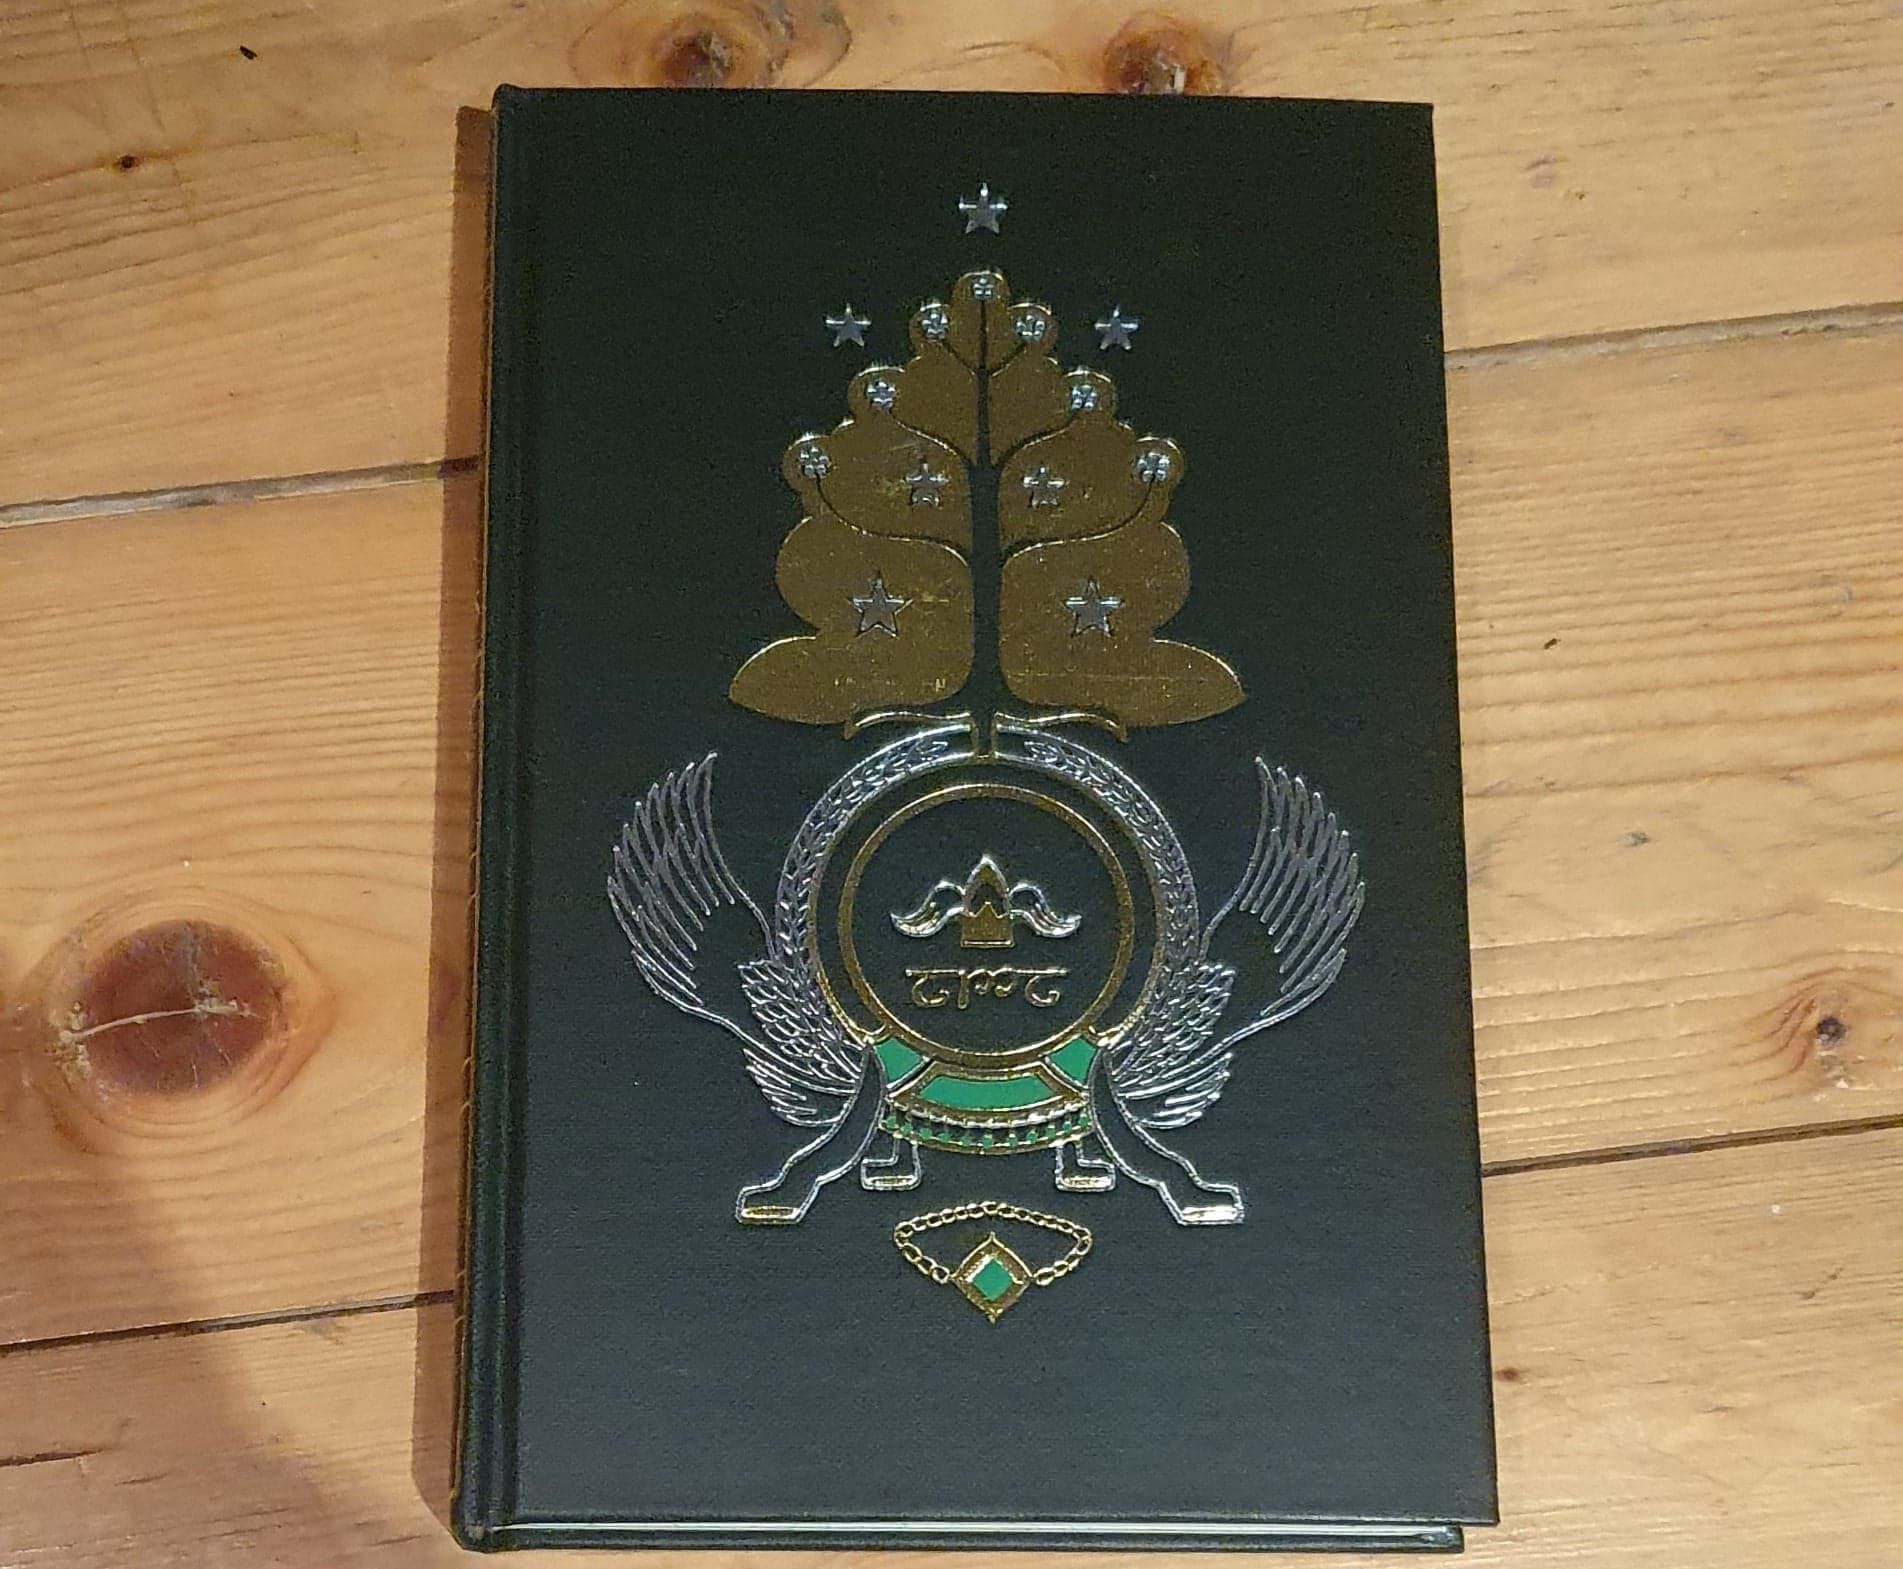 A photo of my 1969 copy of The Lord of the Rings